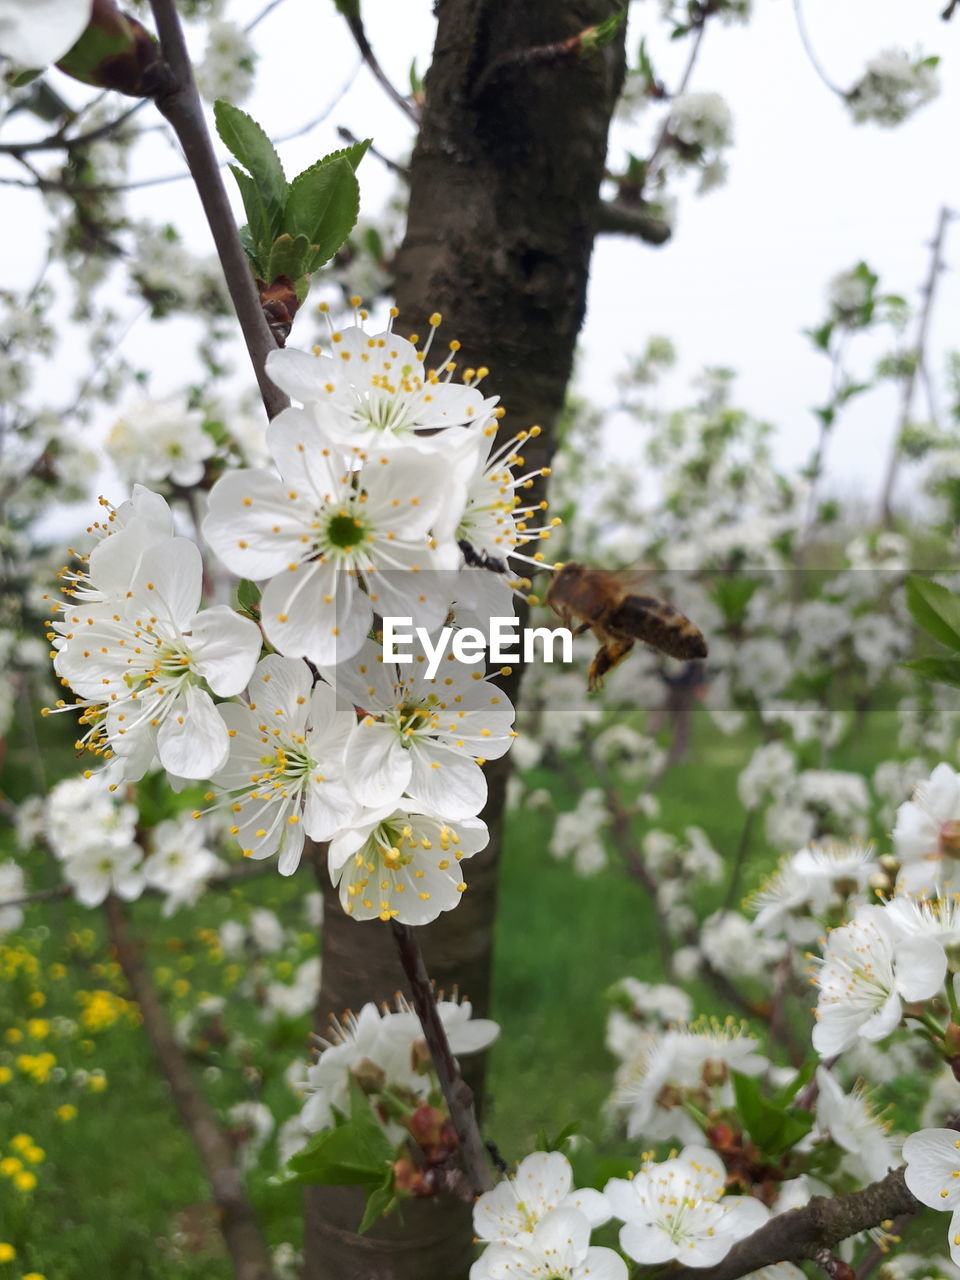 CLOSE-UP OF INSECT ON WHITE FLOWERING TREE